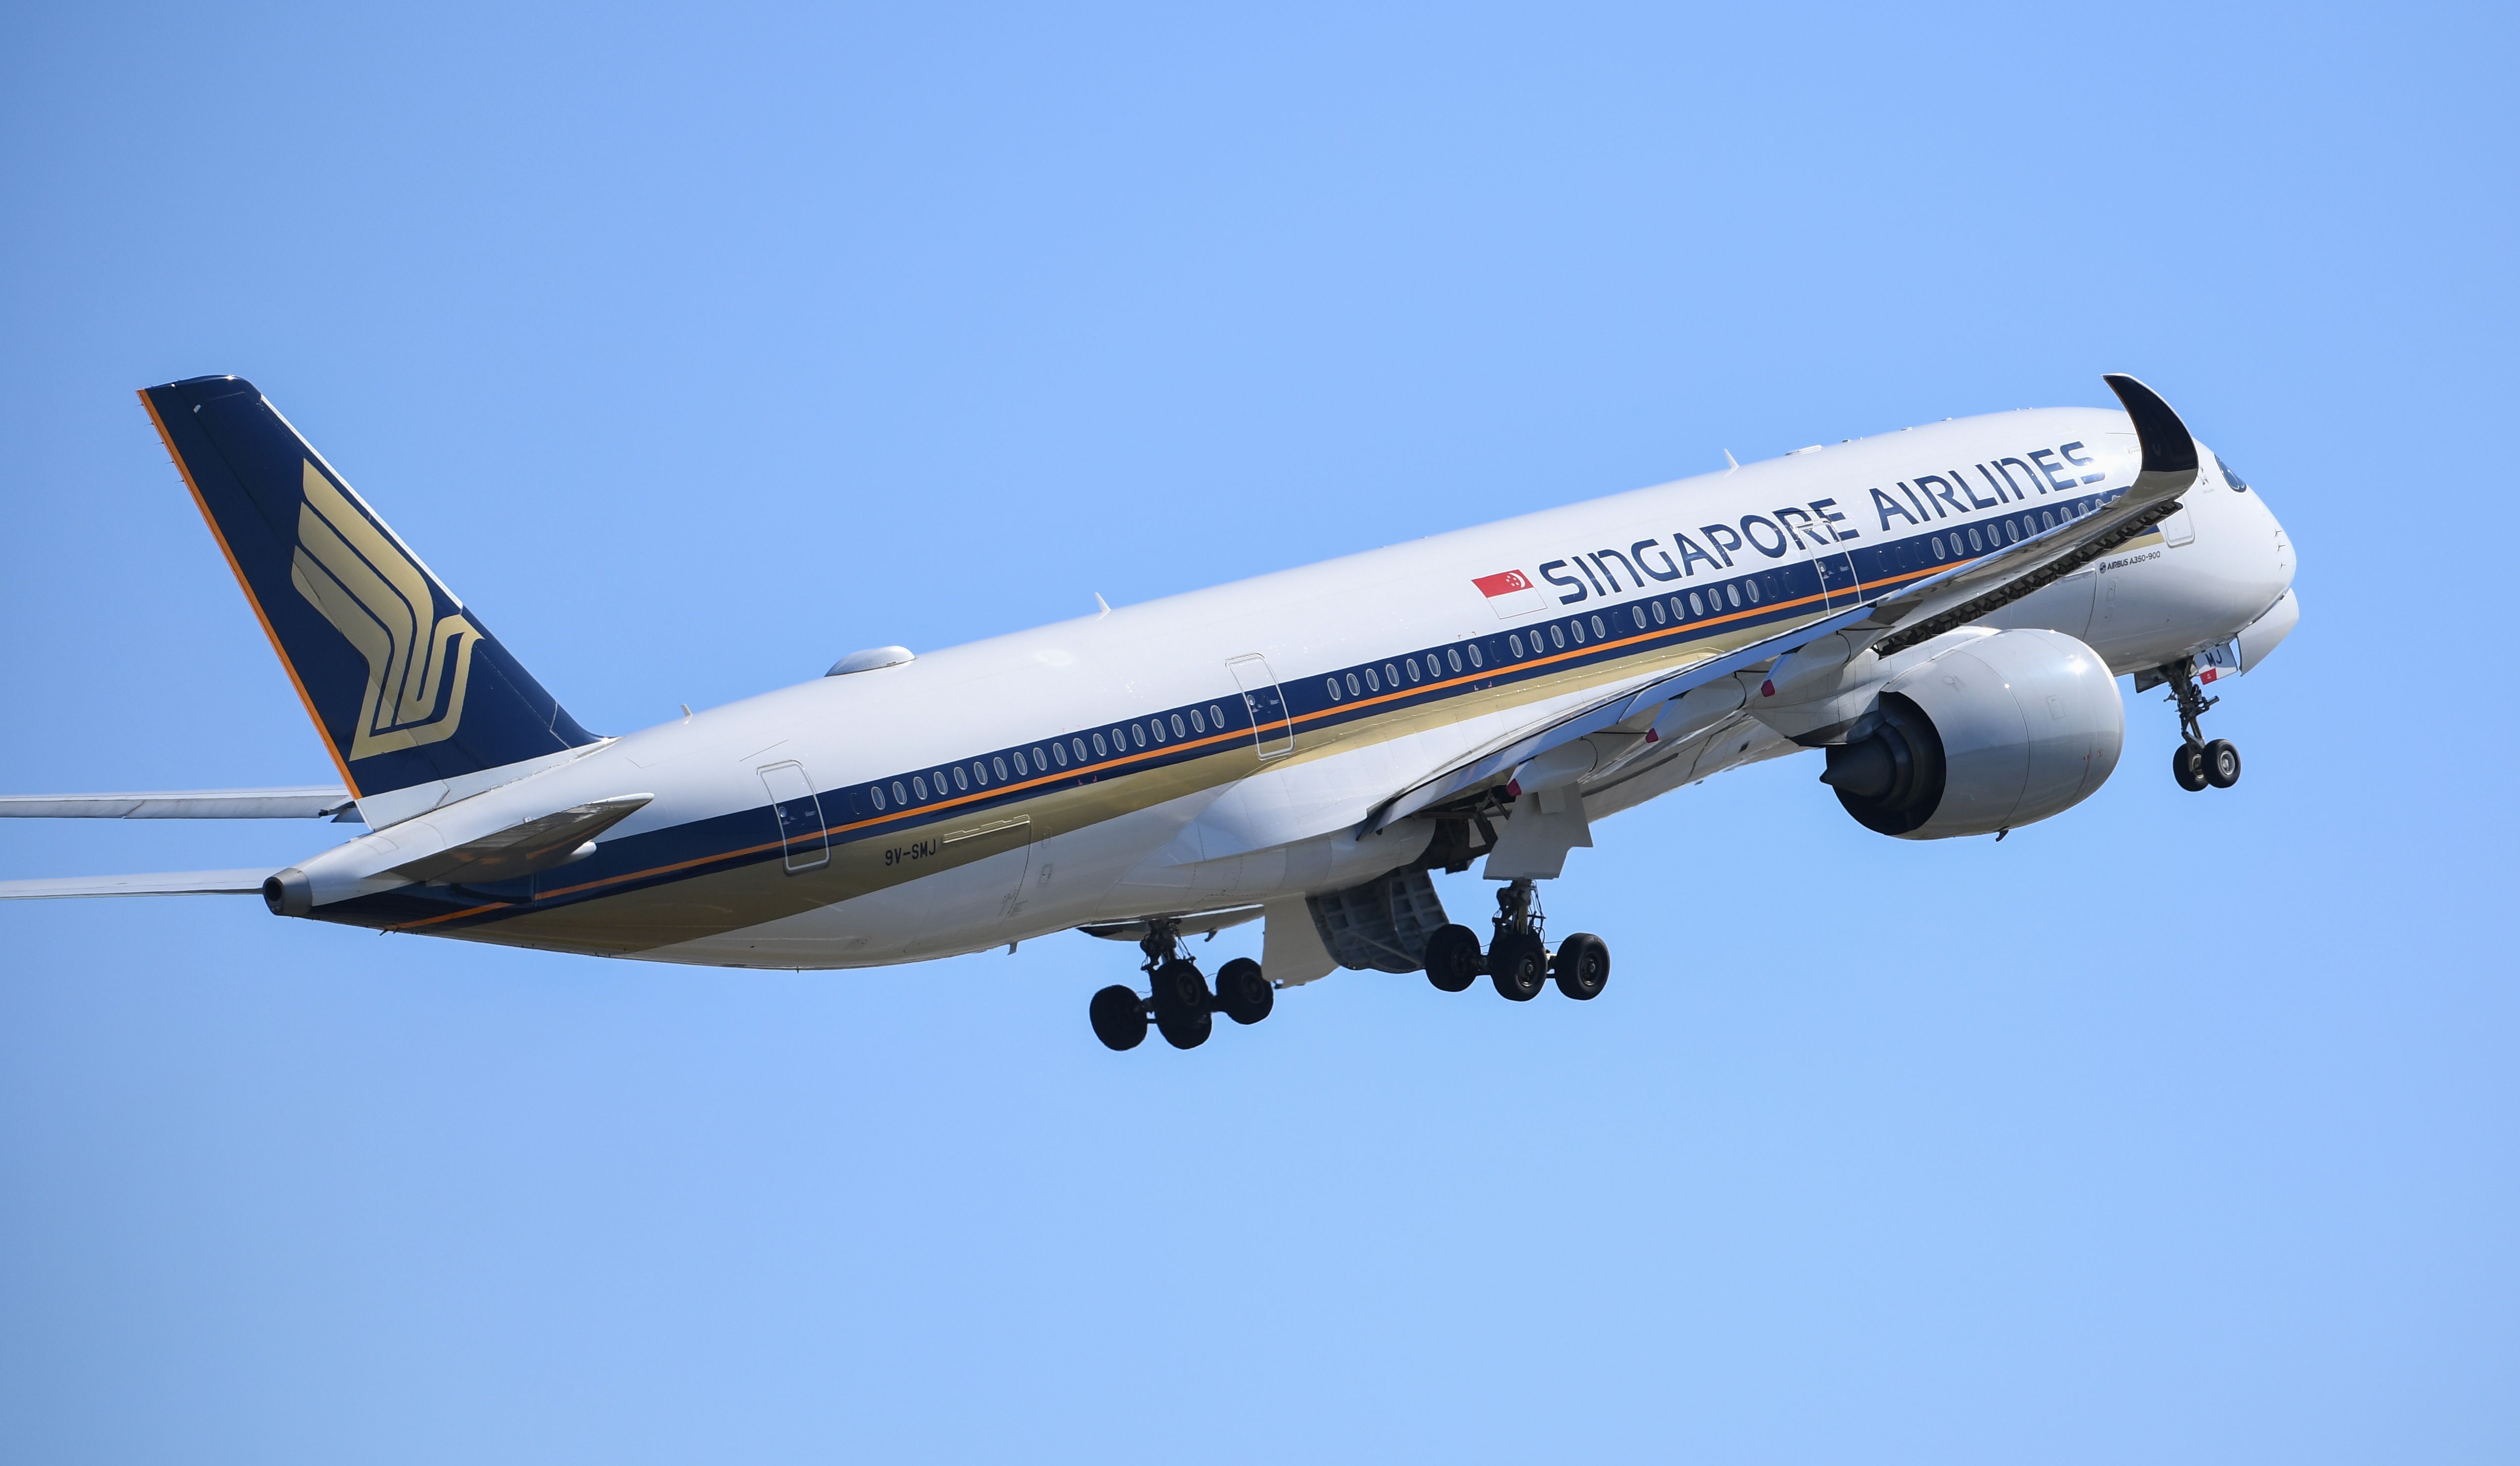 Singapore Airlines Airbus A350-900 Taking Off